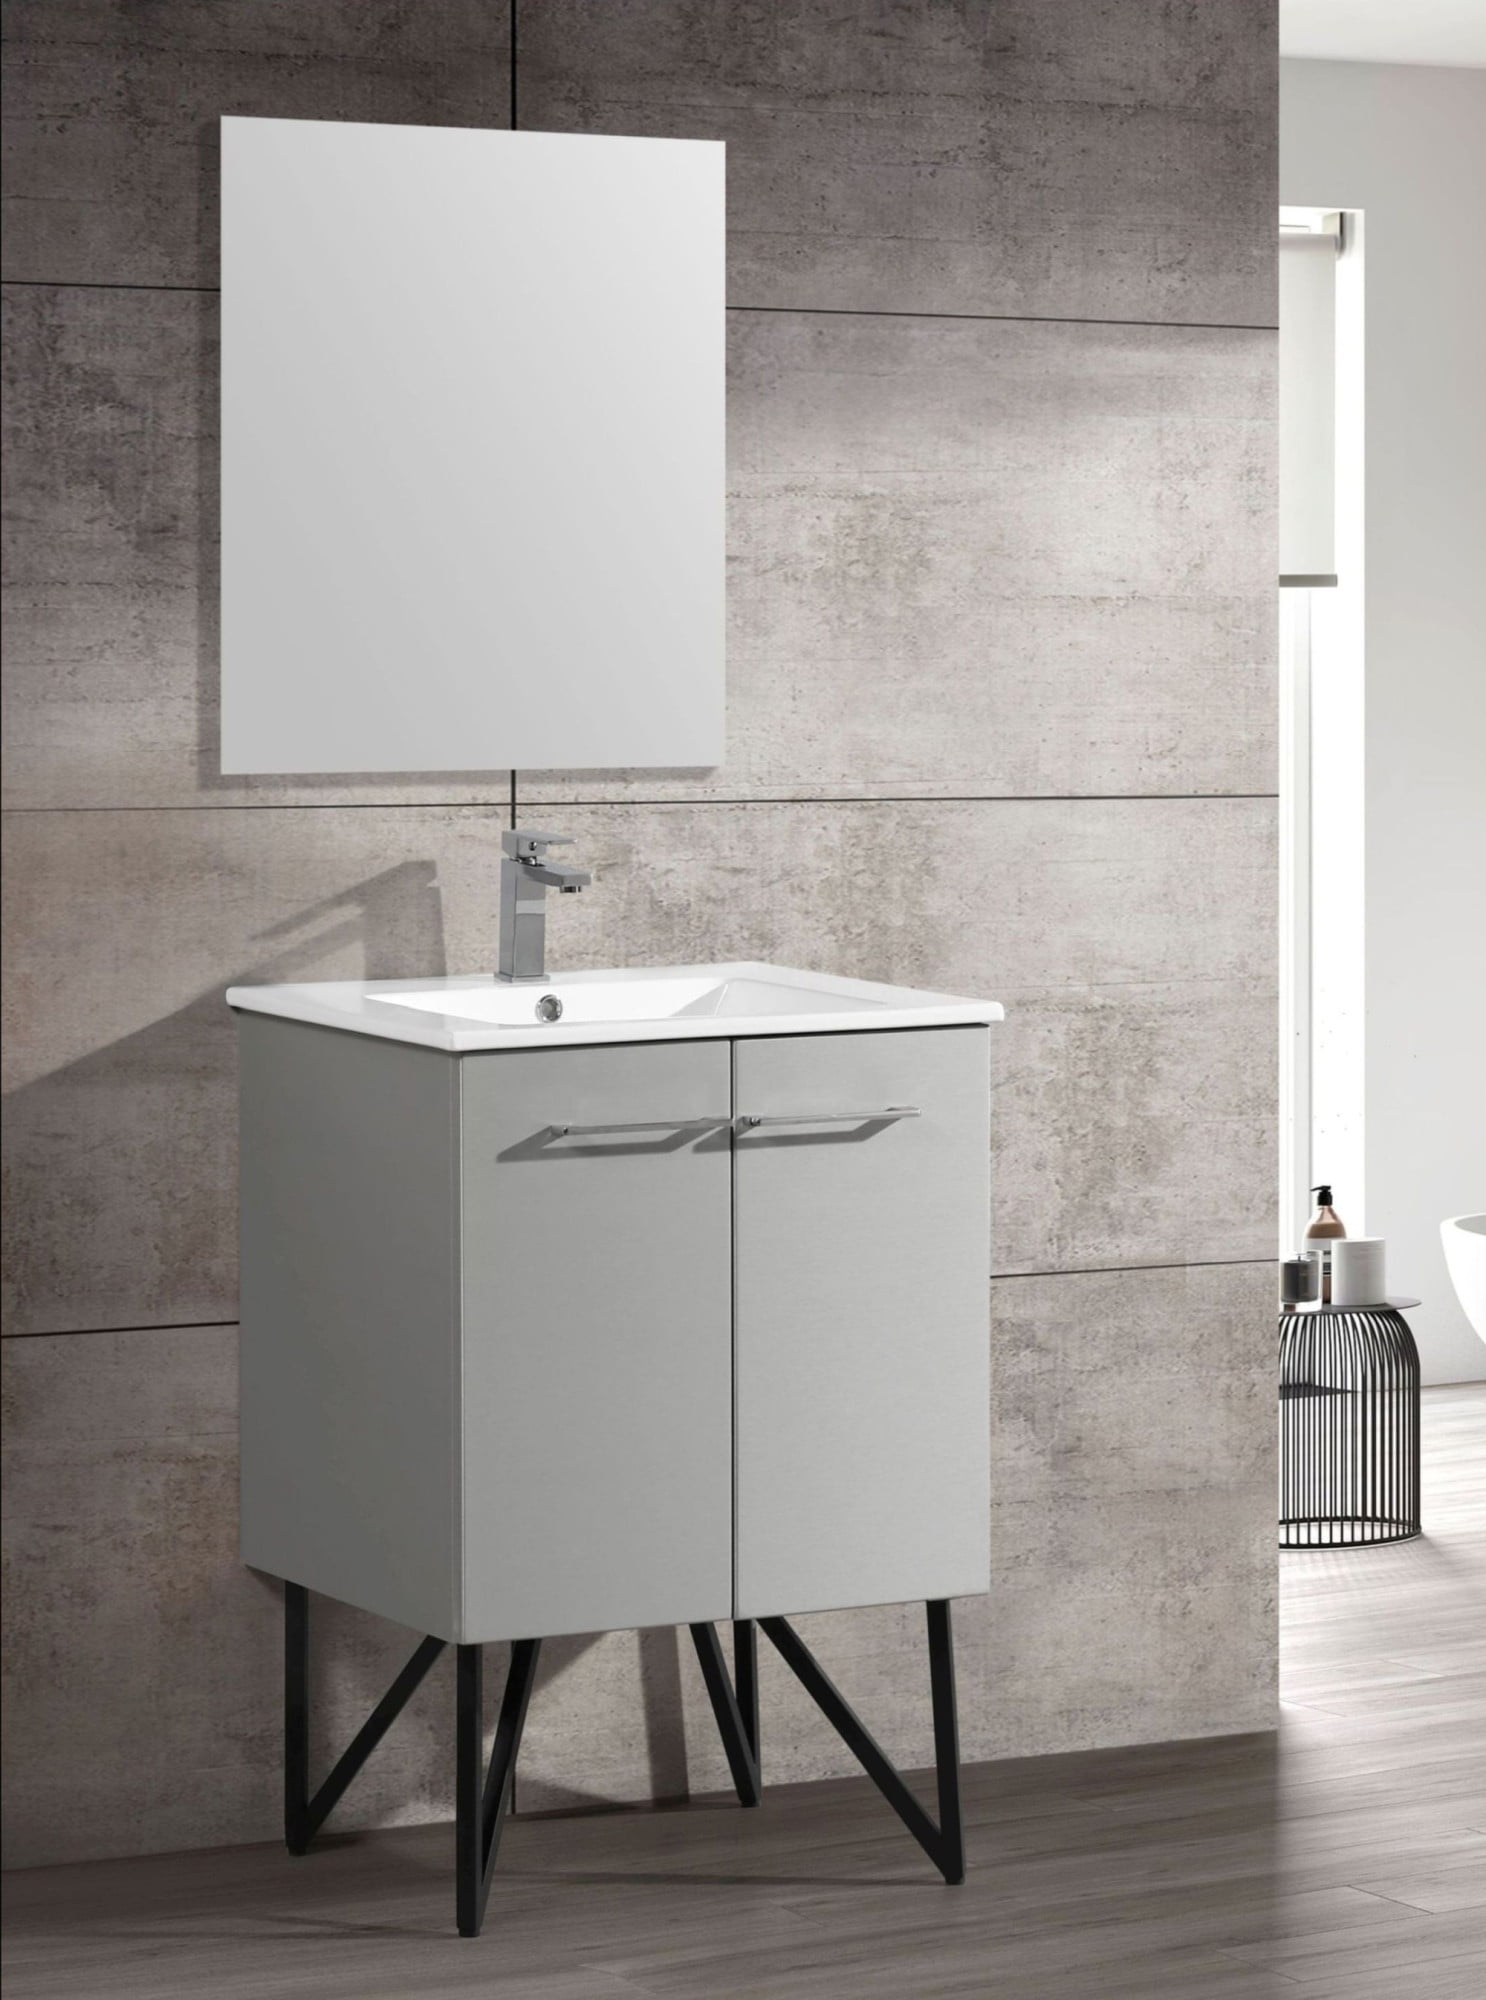 Vanity Units, standing or wall-mounted